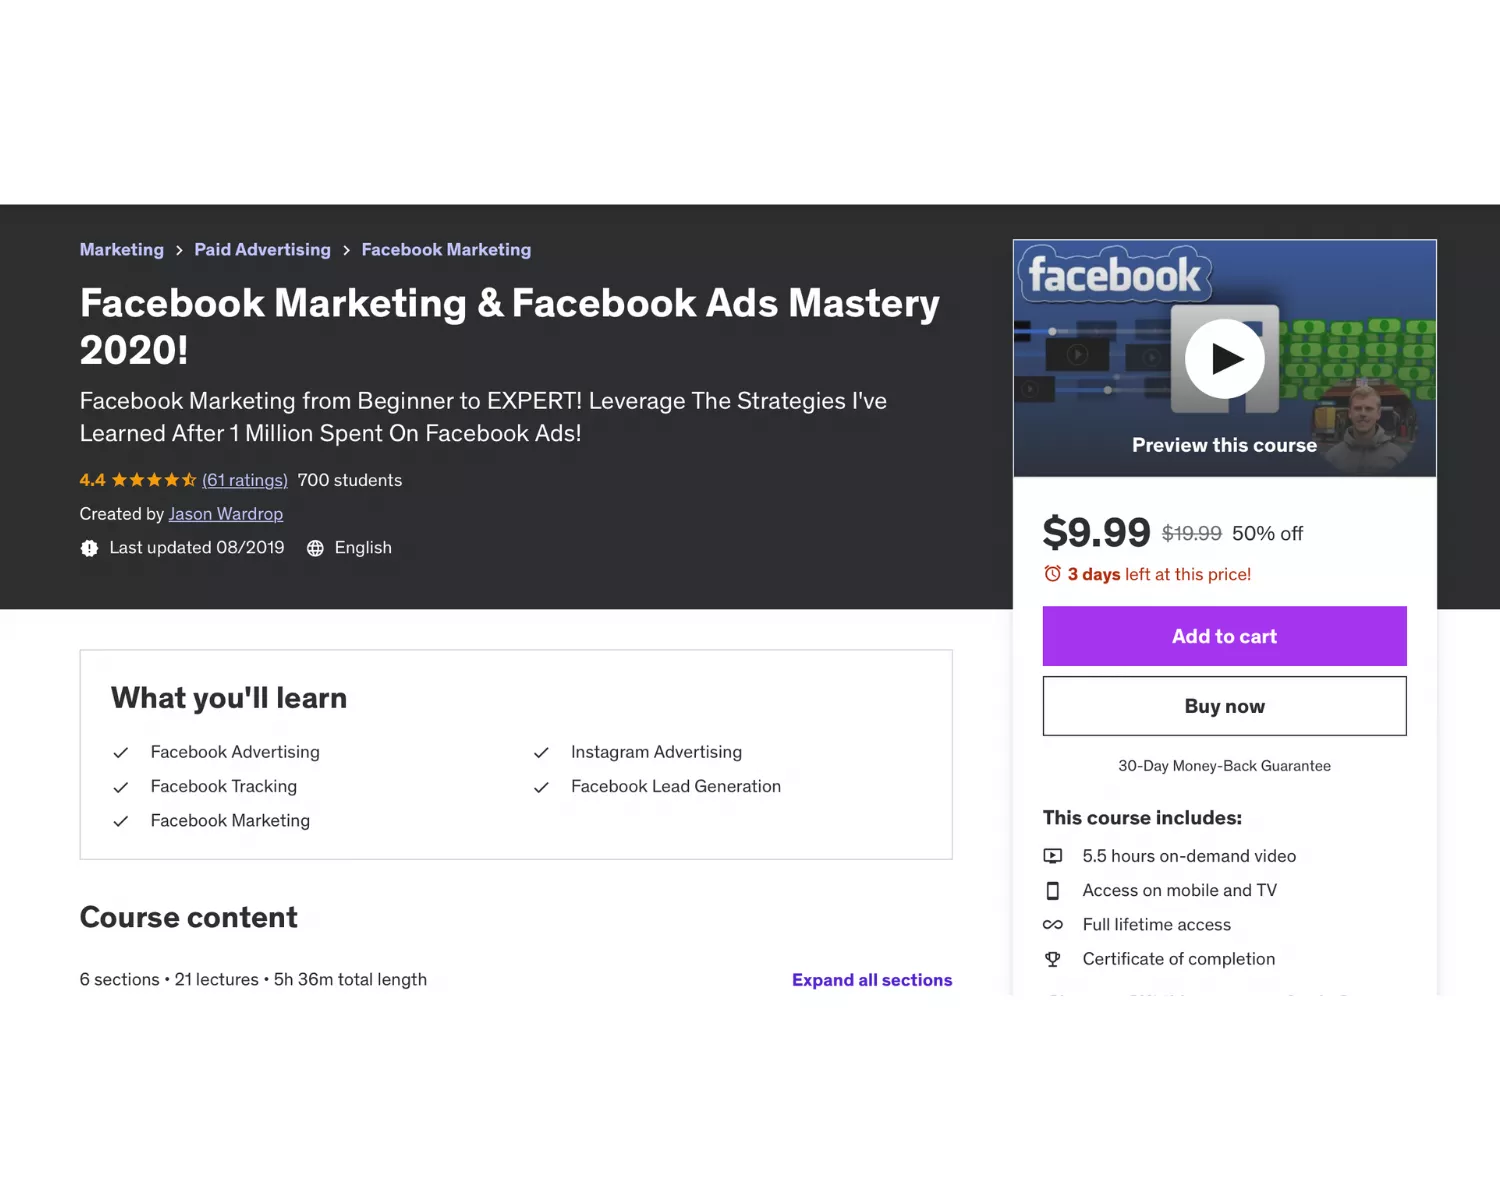 Facebook Marketing and Facebook Ads Mastery